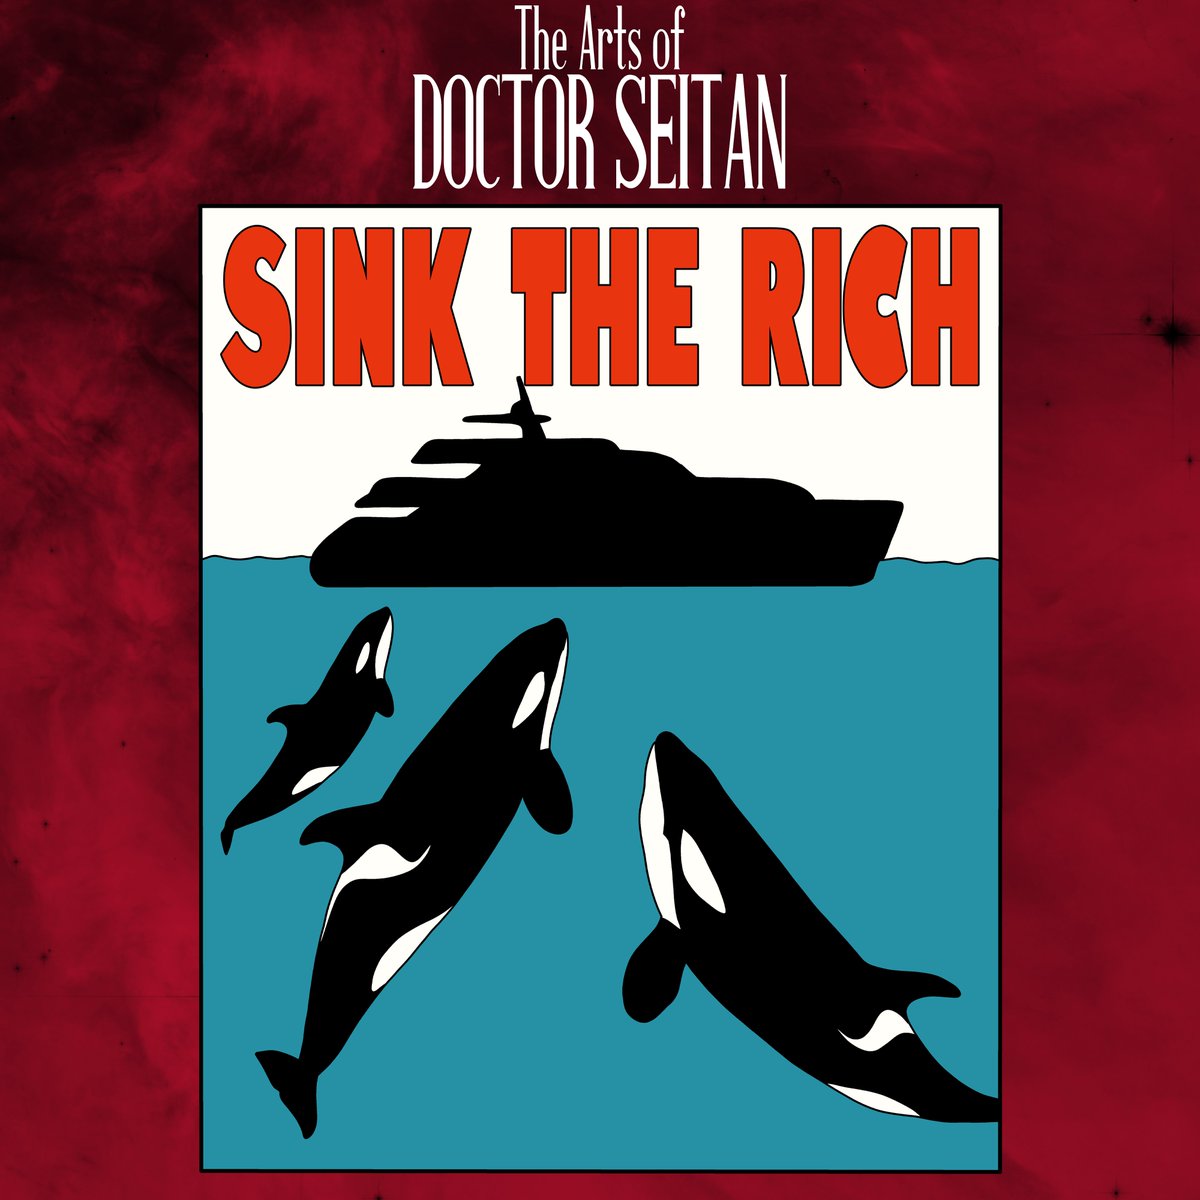 Woke up feeling inspired by the Orcas today. #orcauprising #orcas #sinktherich #anticapitalism #JAWS